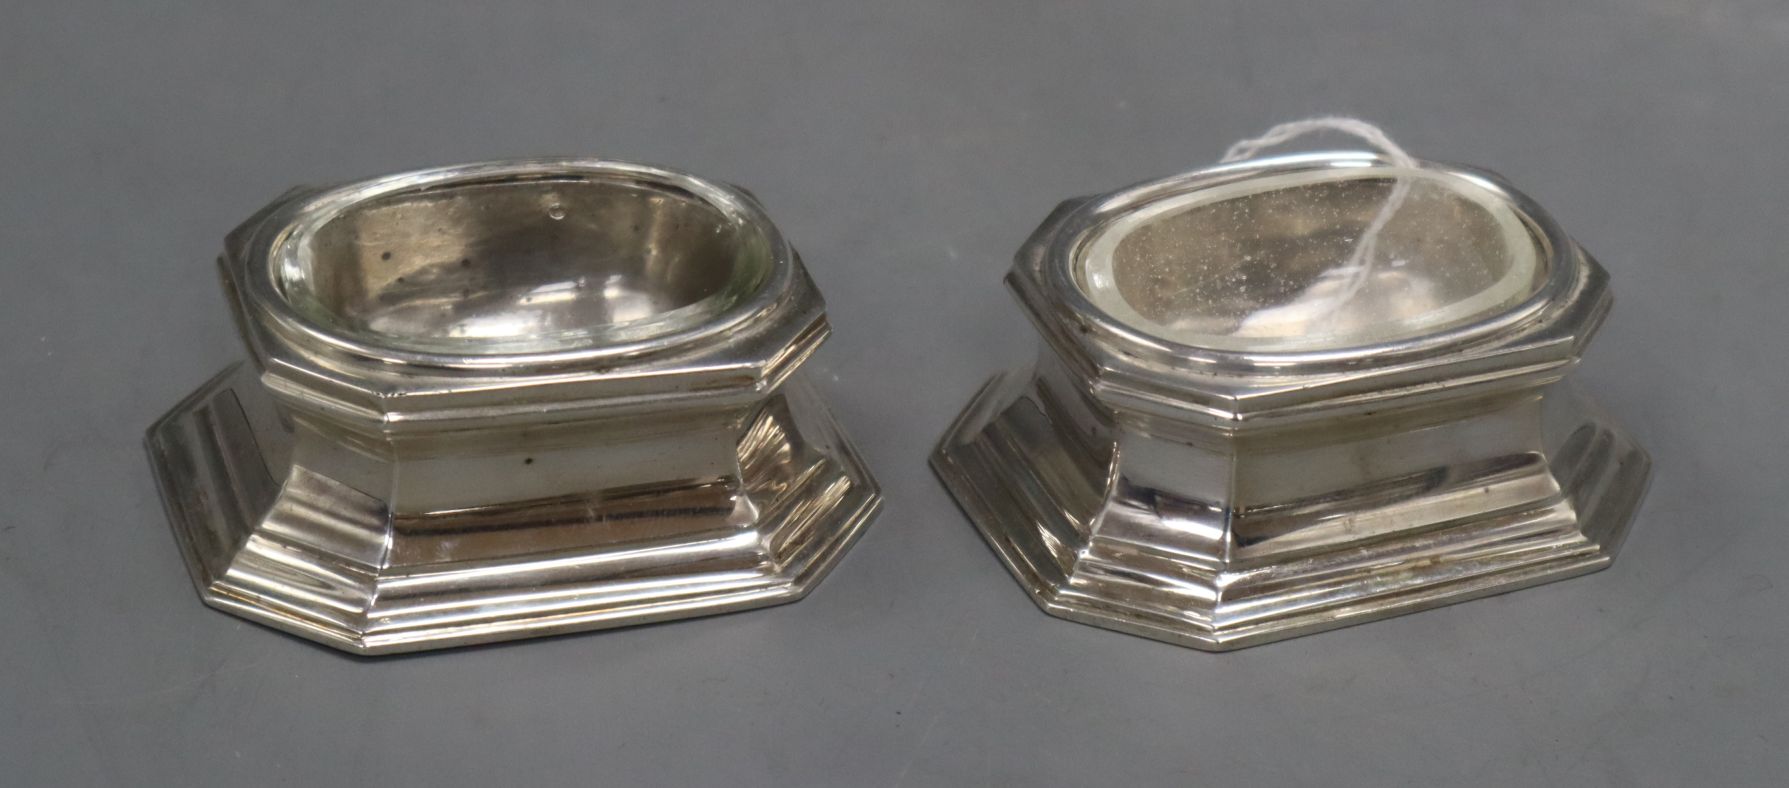 A pair of Brittania standard silver trencher salts with glass liners, Tessiers Ltd, London, 1957,